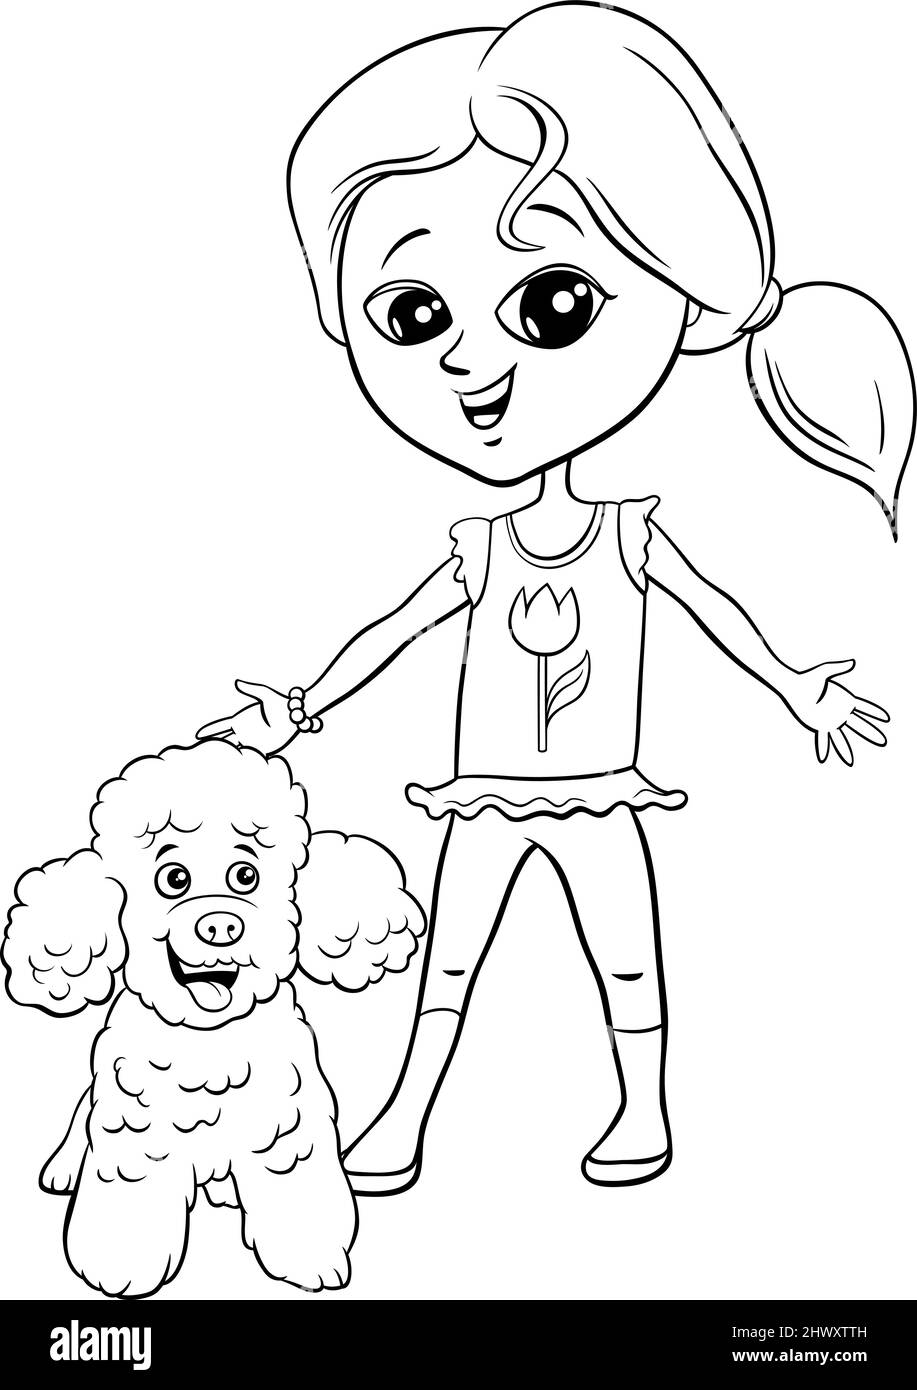 Black and white cartoon illustration of cute girl with poodle dog character coloring book page Stock Vector